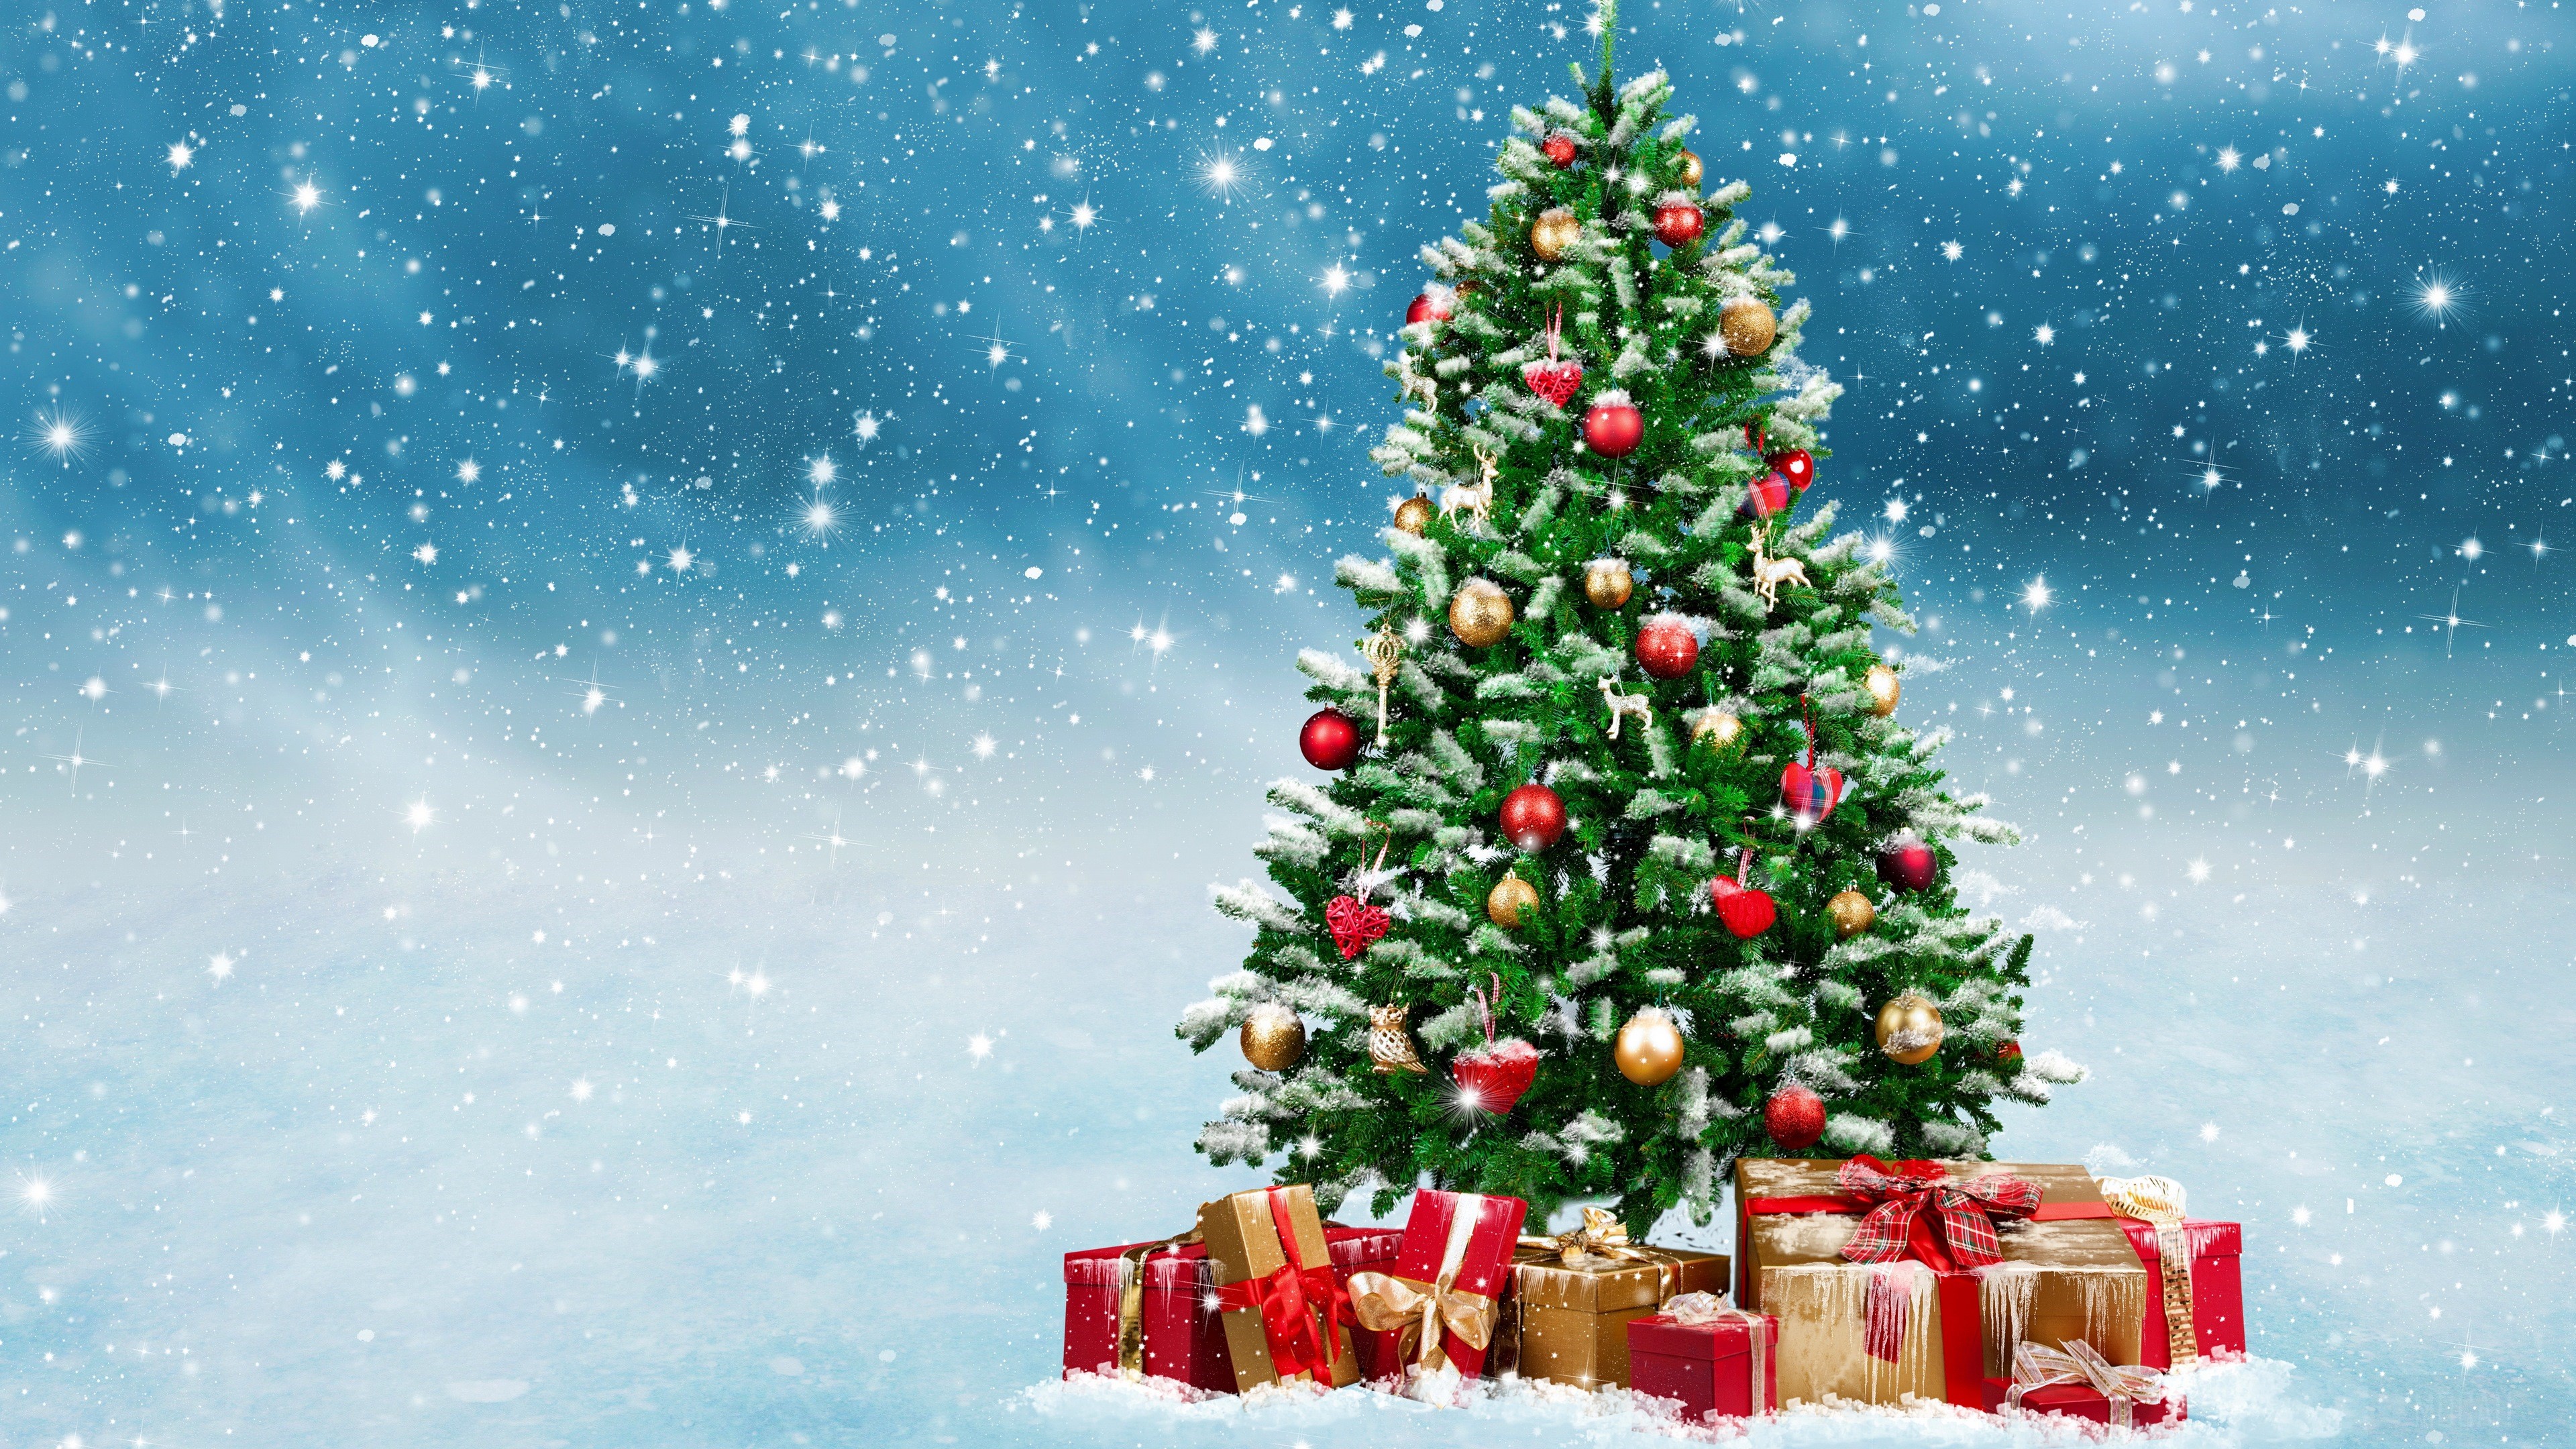 Christmas tree p k k hd wallpapers backgrounds free download rare gallery